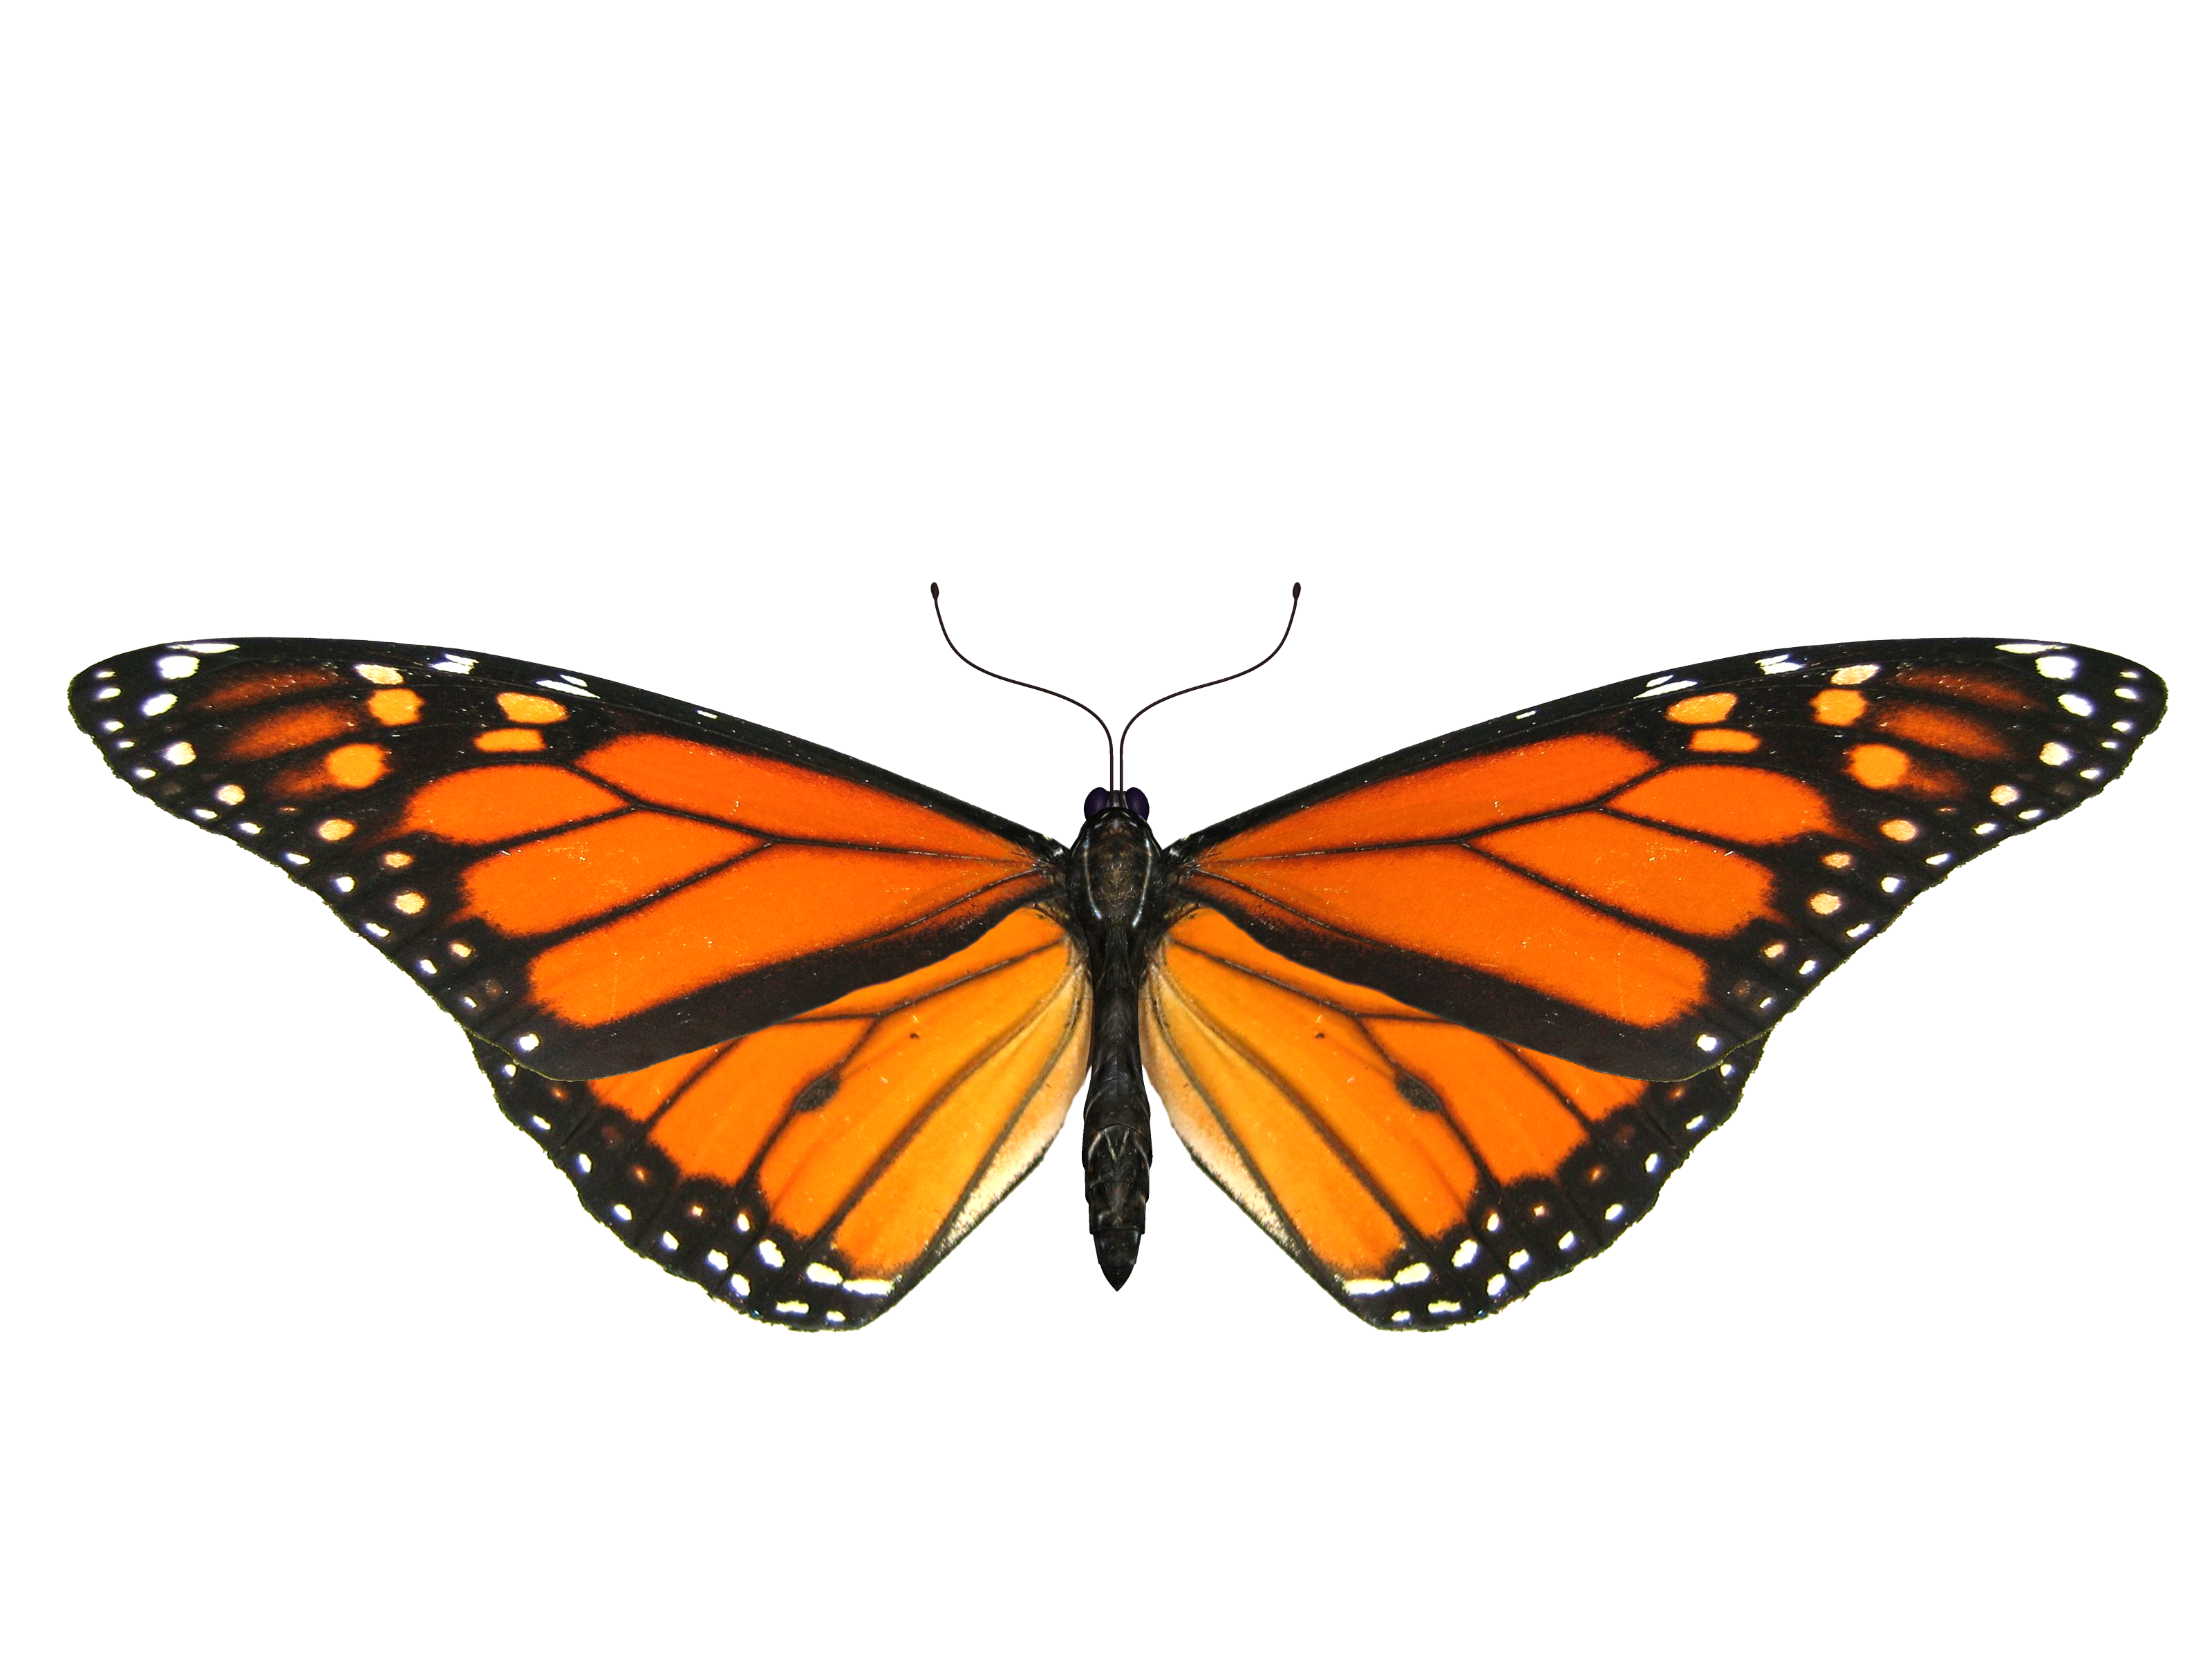 Butterfly PNG image transparent image download, size: 3200x2400px